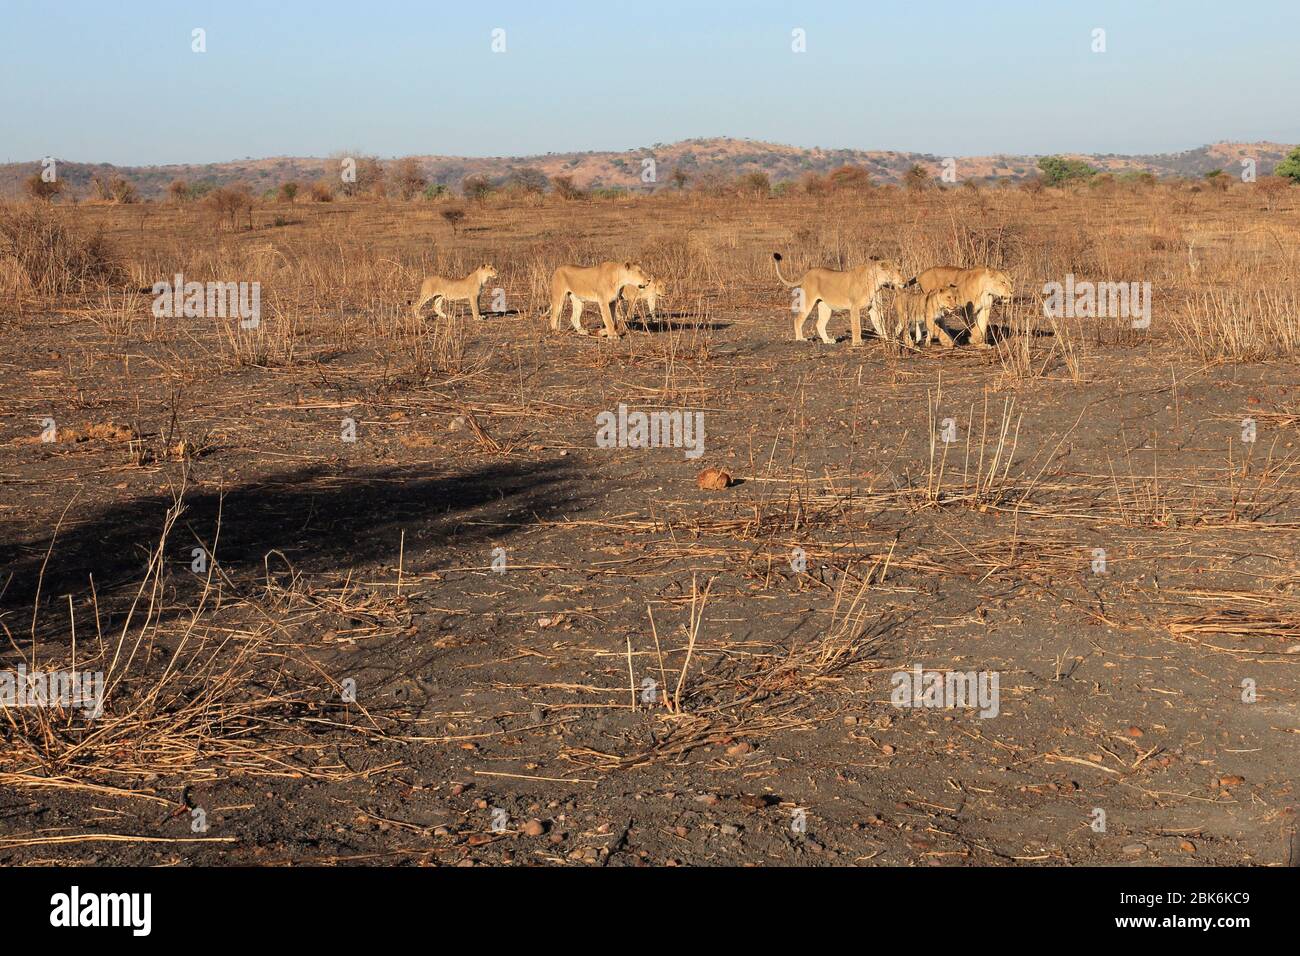 A pride of lions travelling through the savanna in early morning. Stock Photo